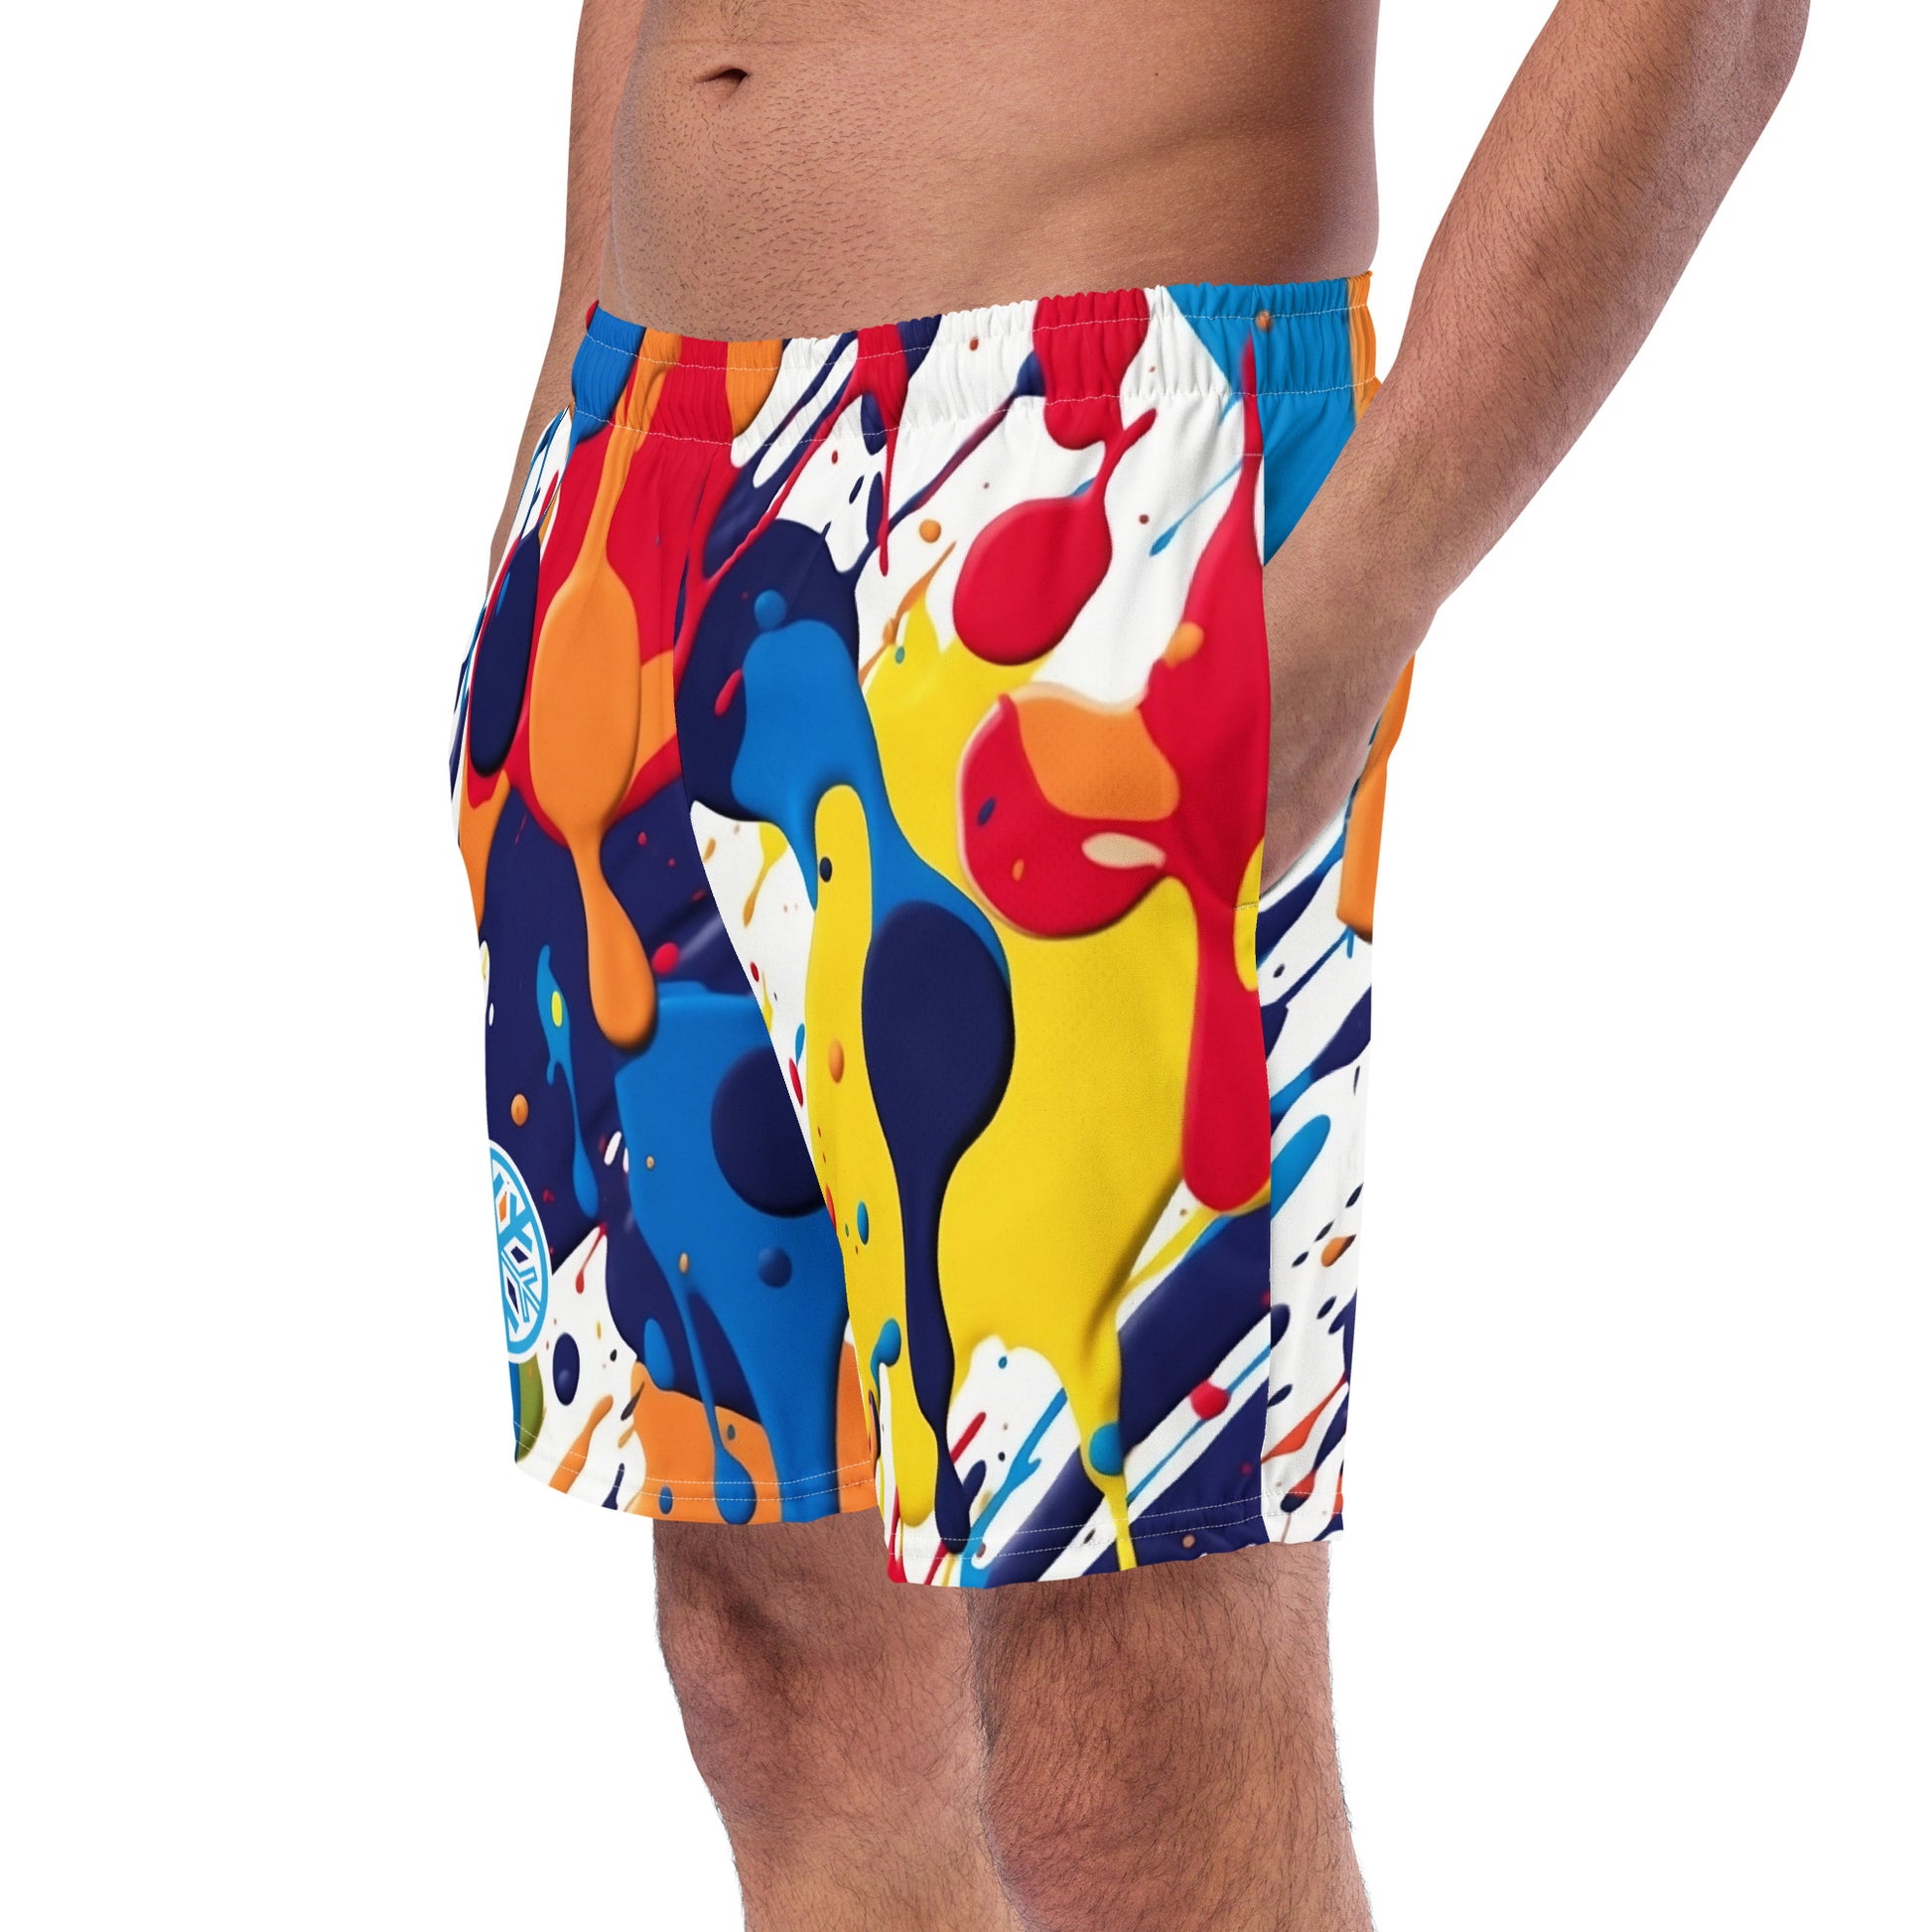 man side with paint splashes swim shorts by B.Different Clothing independent streetwear inspired by street art graffiti